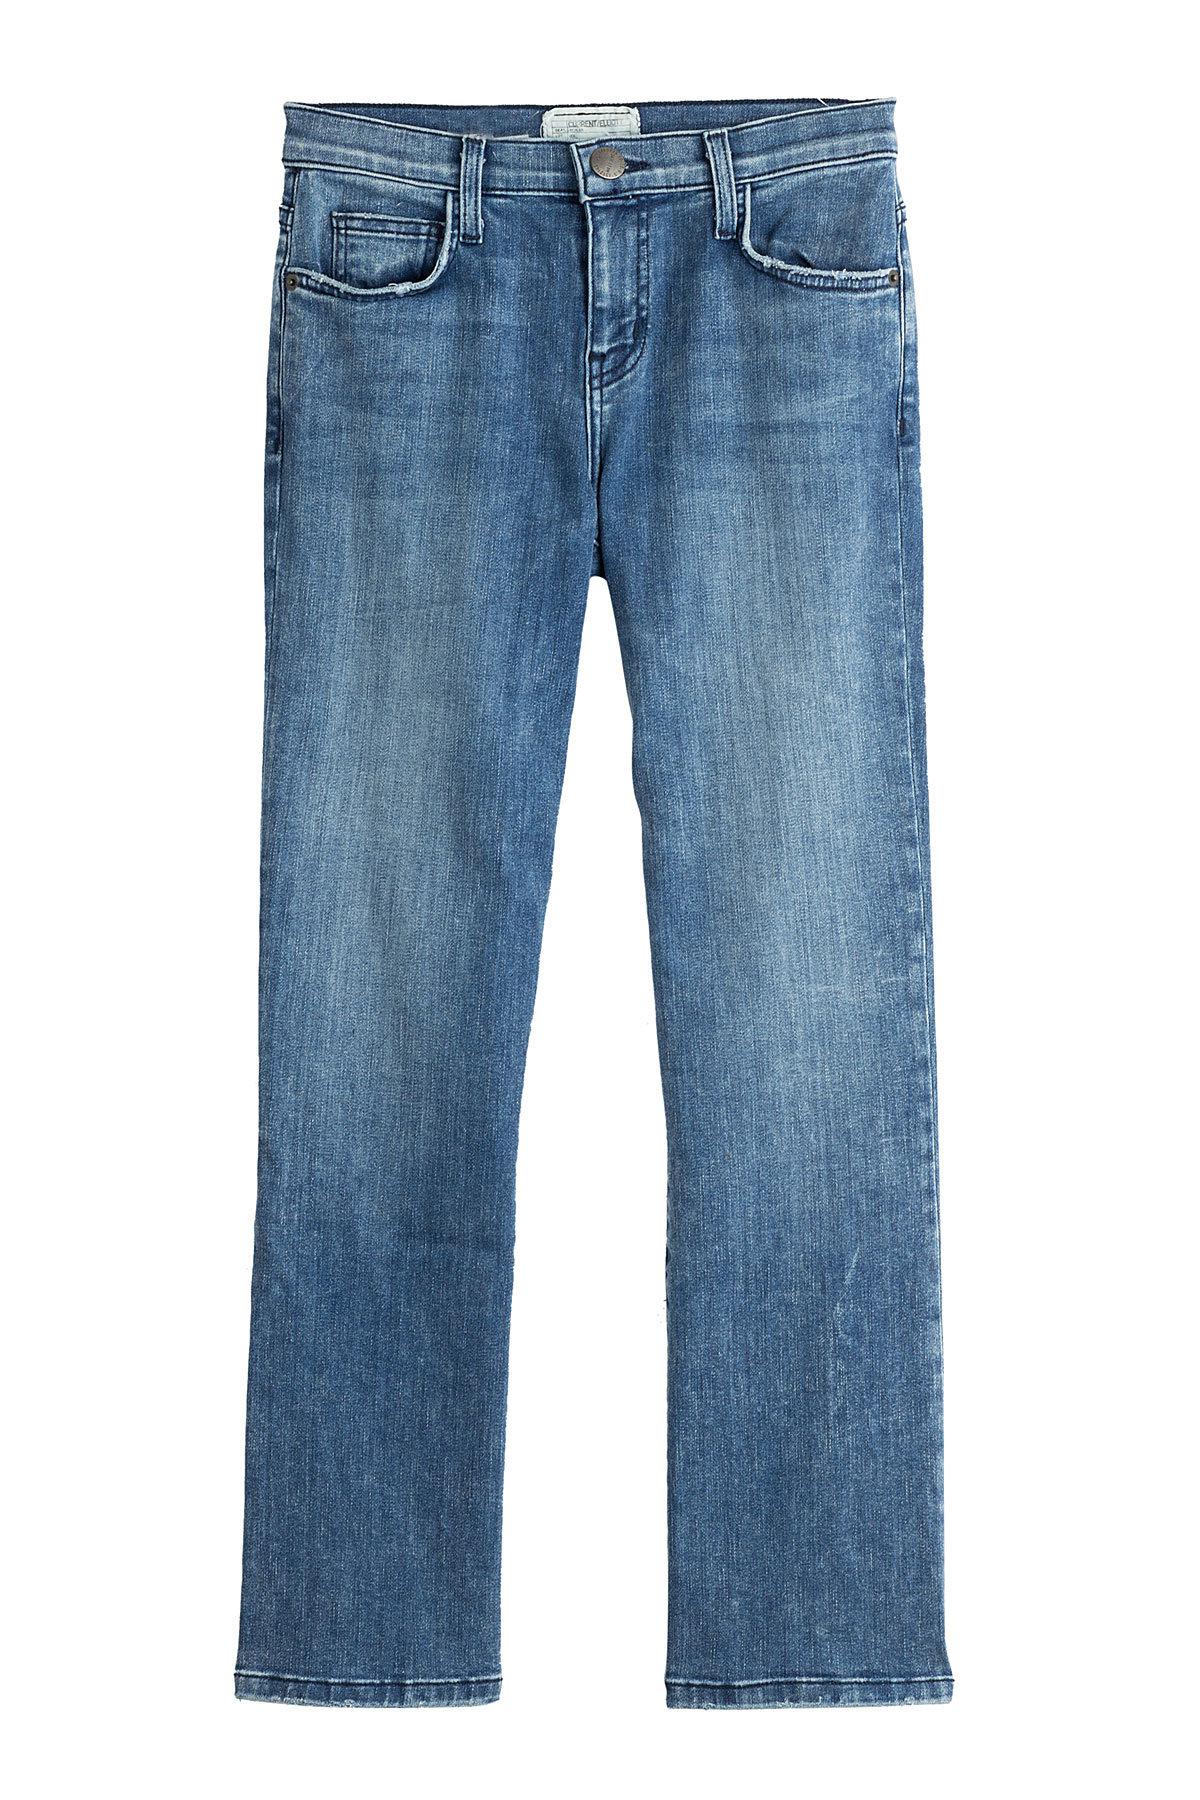 Lyst - Current/Elliott Cropped Bootcut Jeans in Blue